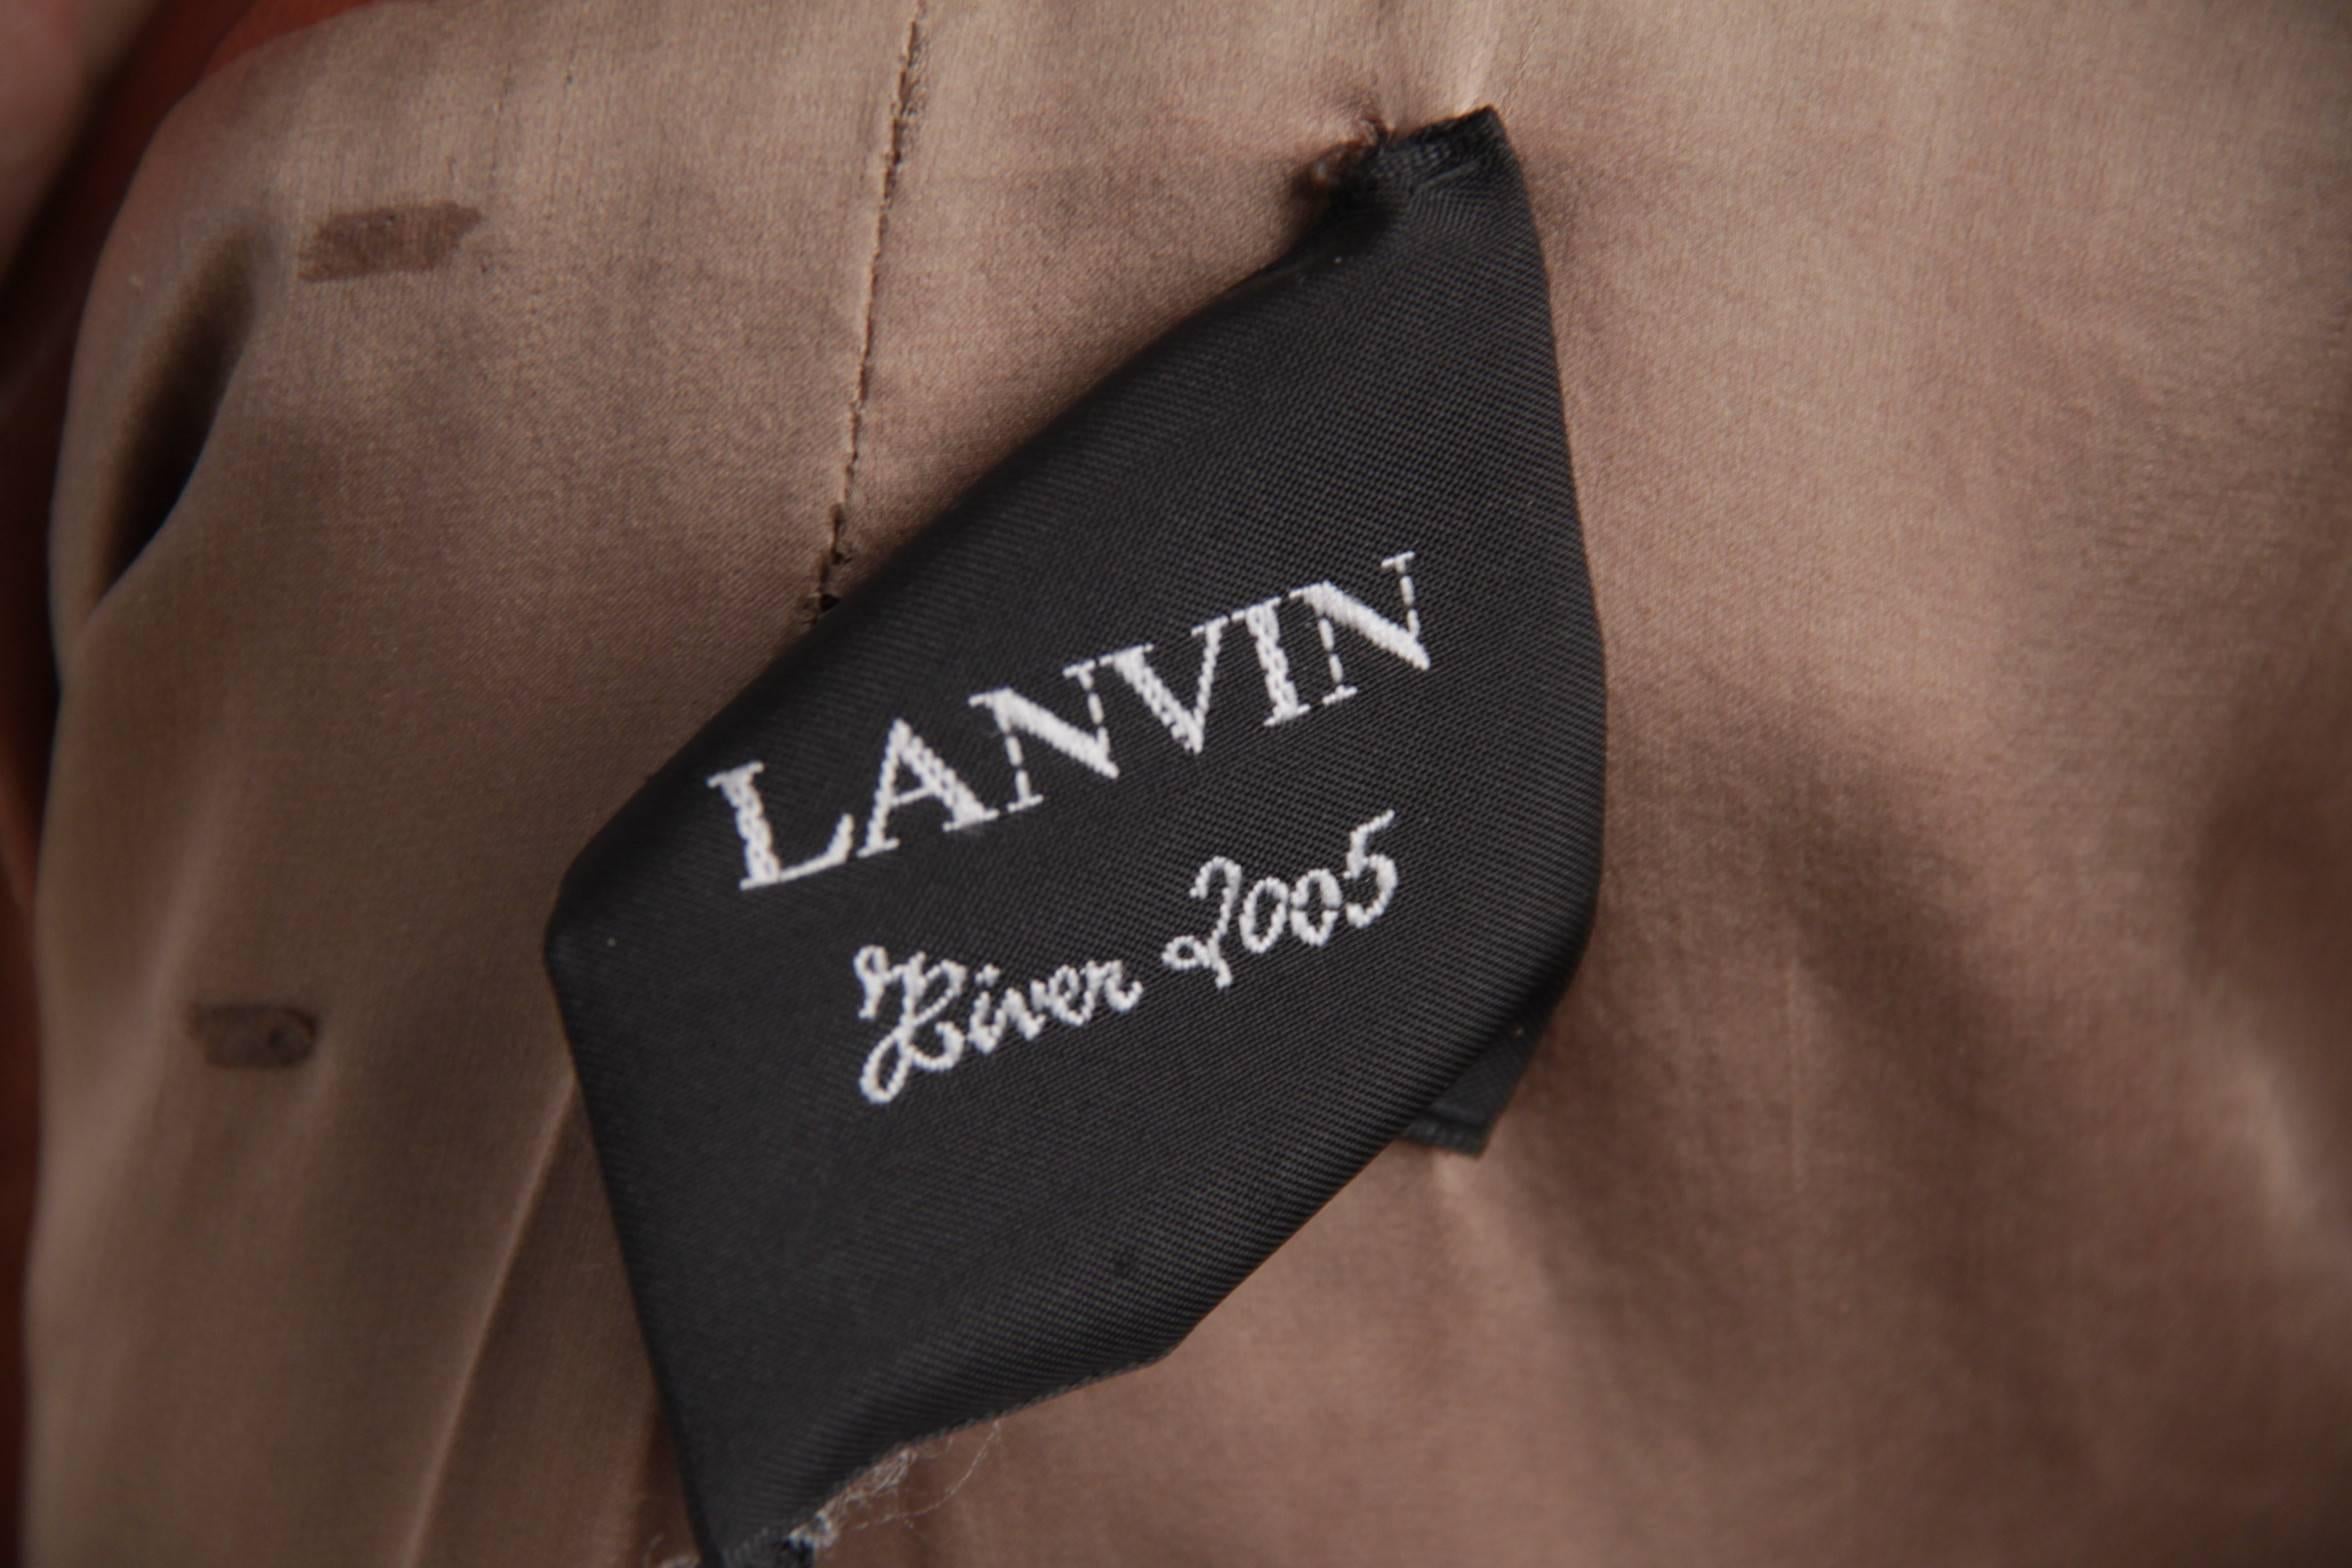 LANVIN Brown Leather FRINGED JACKET Western Style WINTER 2005 SIZE 34 1